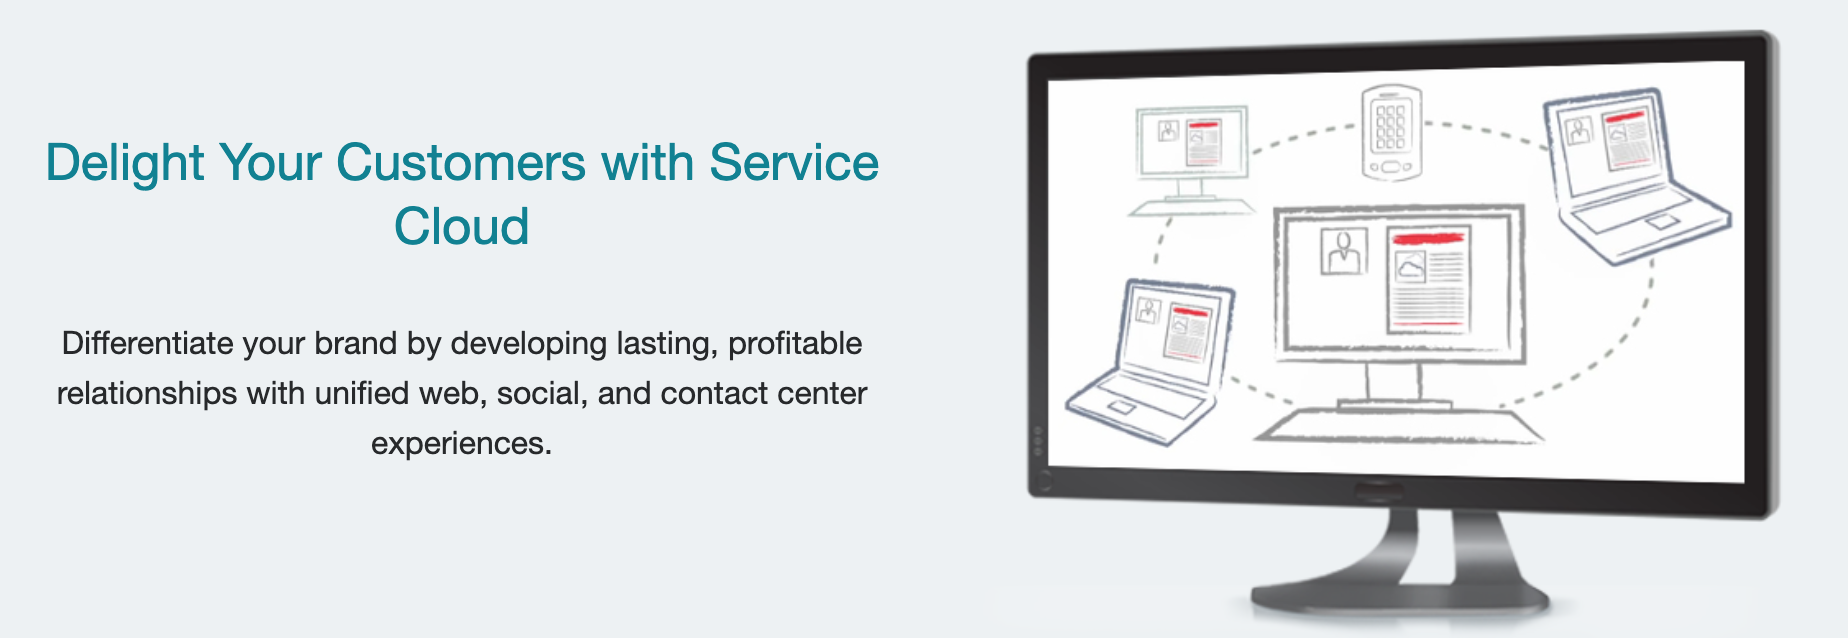 Oracle Service Cloud allows you to deliver the best experiences to your customers on the Web, at the contact center or on social networks.